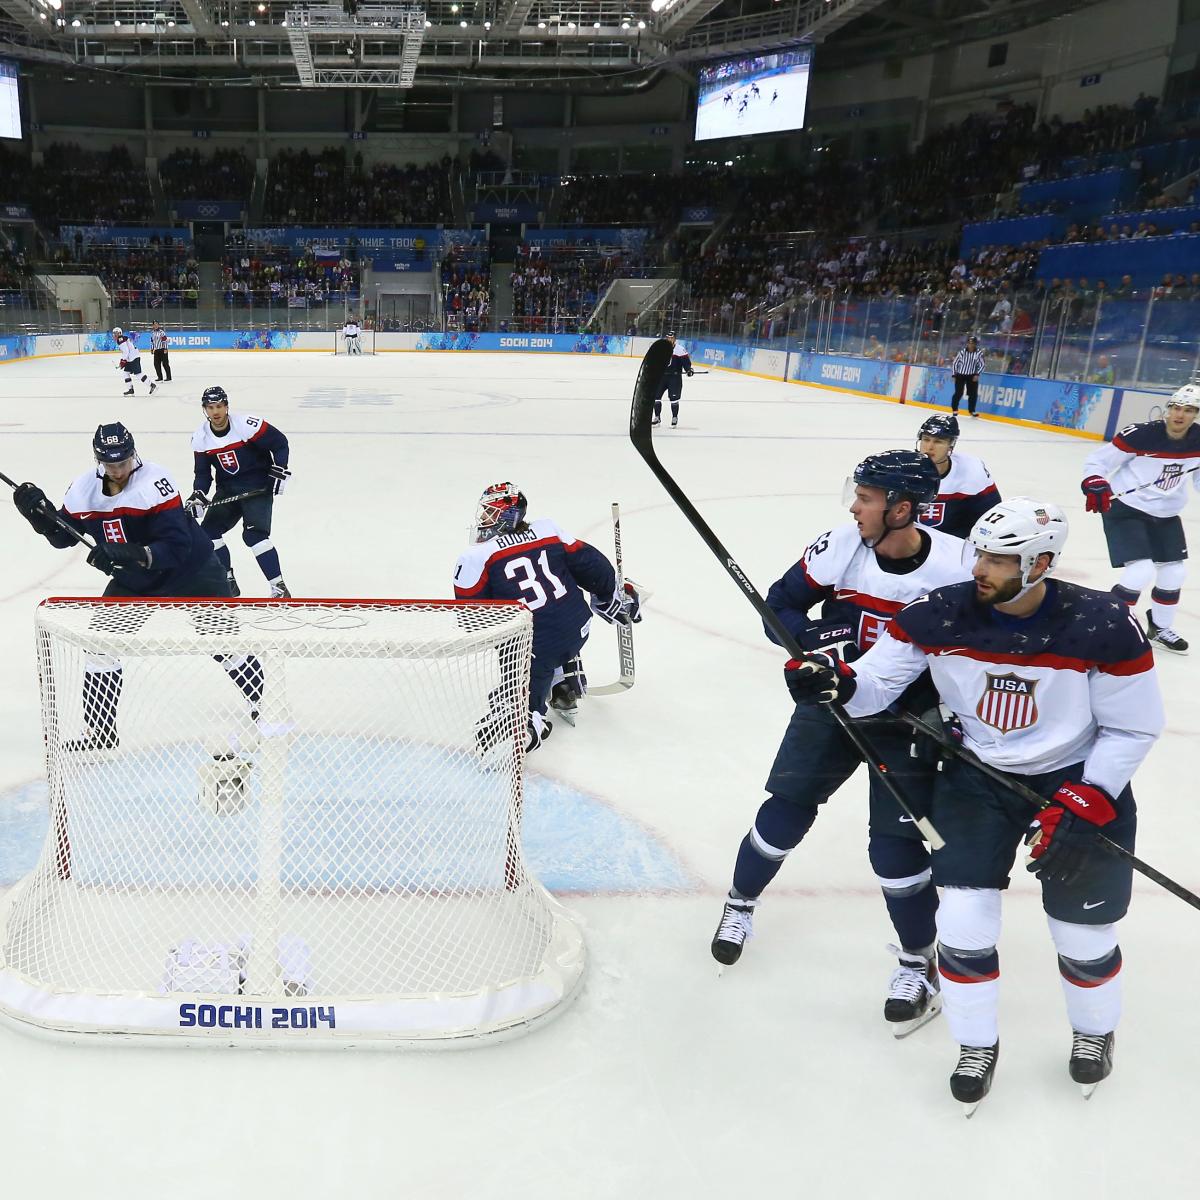 USA vs. Russia: Preview and Prediction for 2014 Olympic Hockey Game